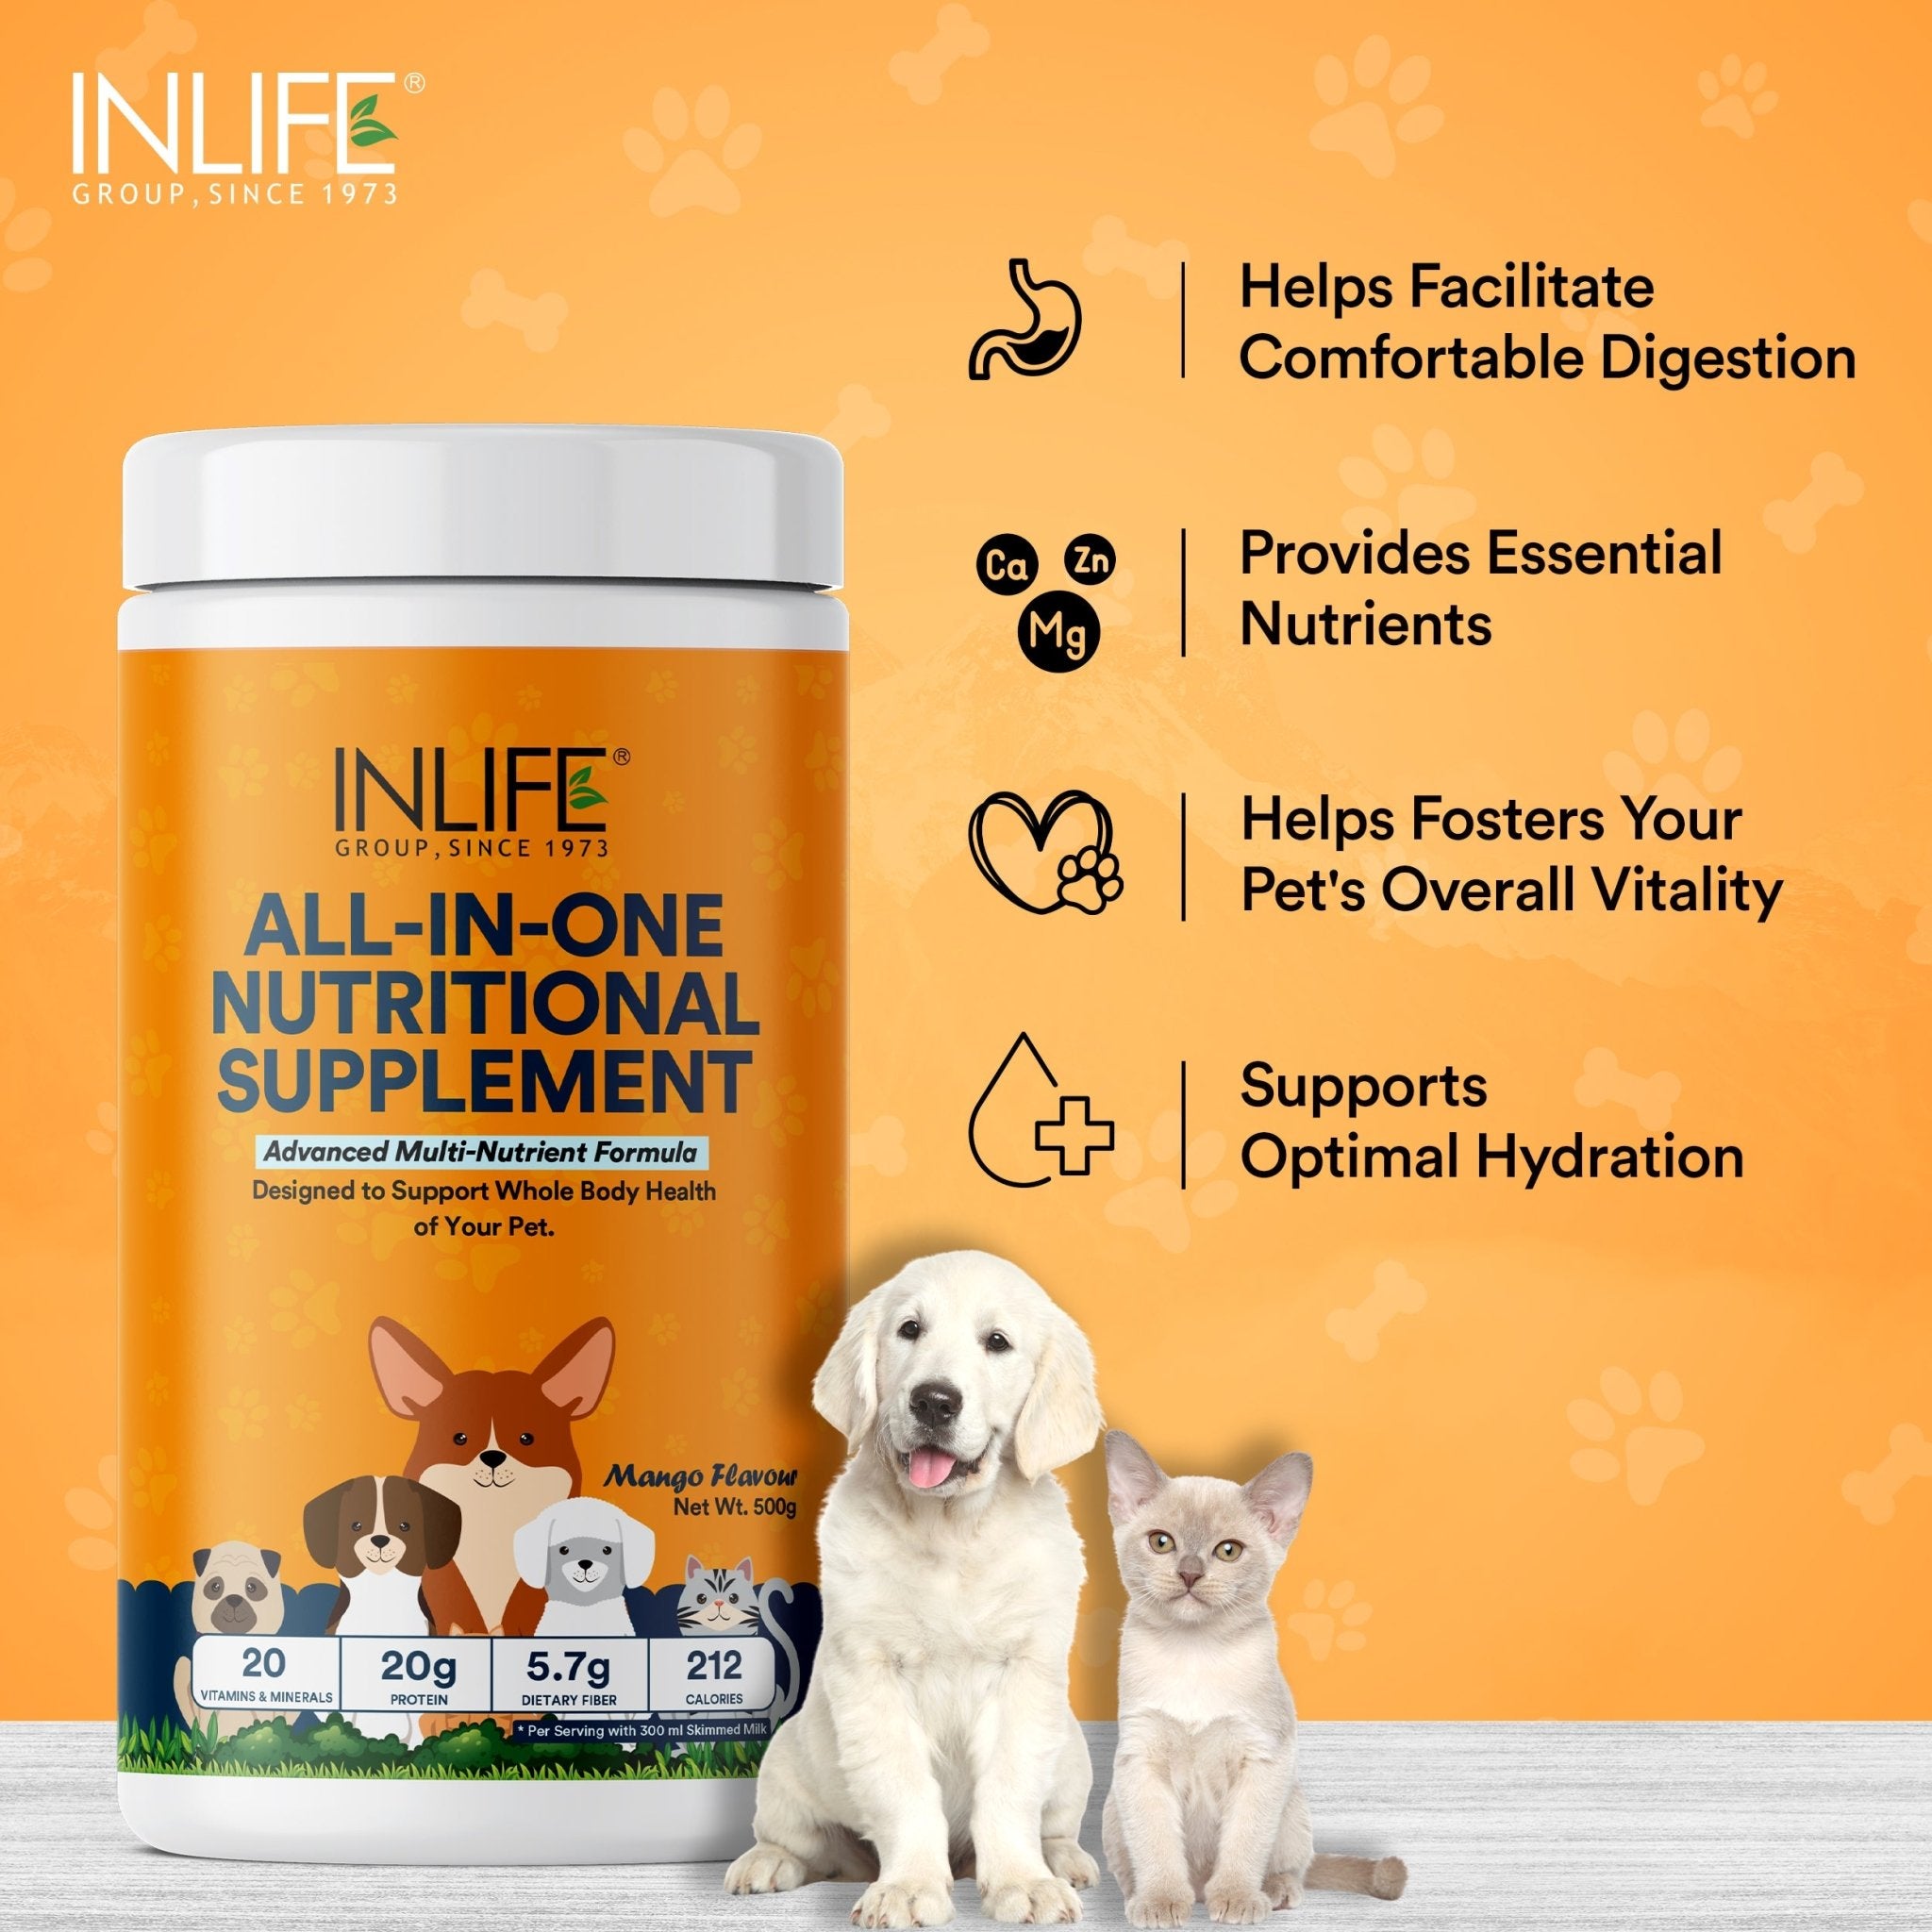 INLIFE Nutritional Meal Mix Powder for Dogs Cats Pets, Advanced Multi-Nutrient Formula - Inlife Pharma Private Limited